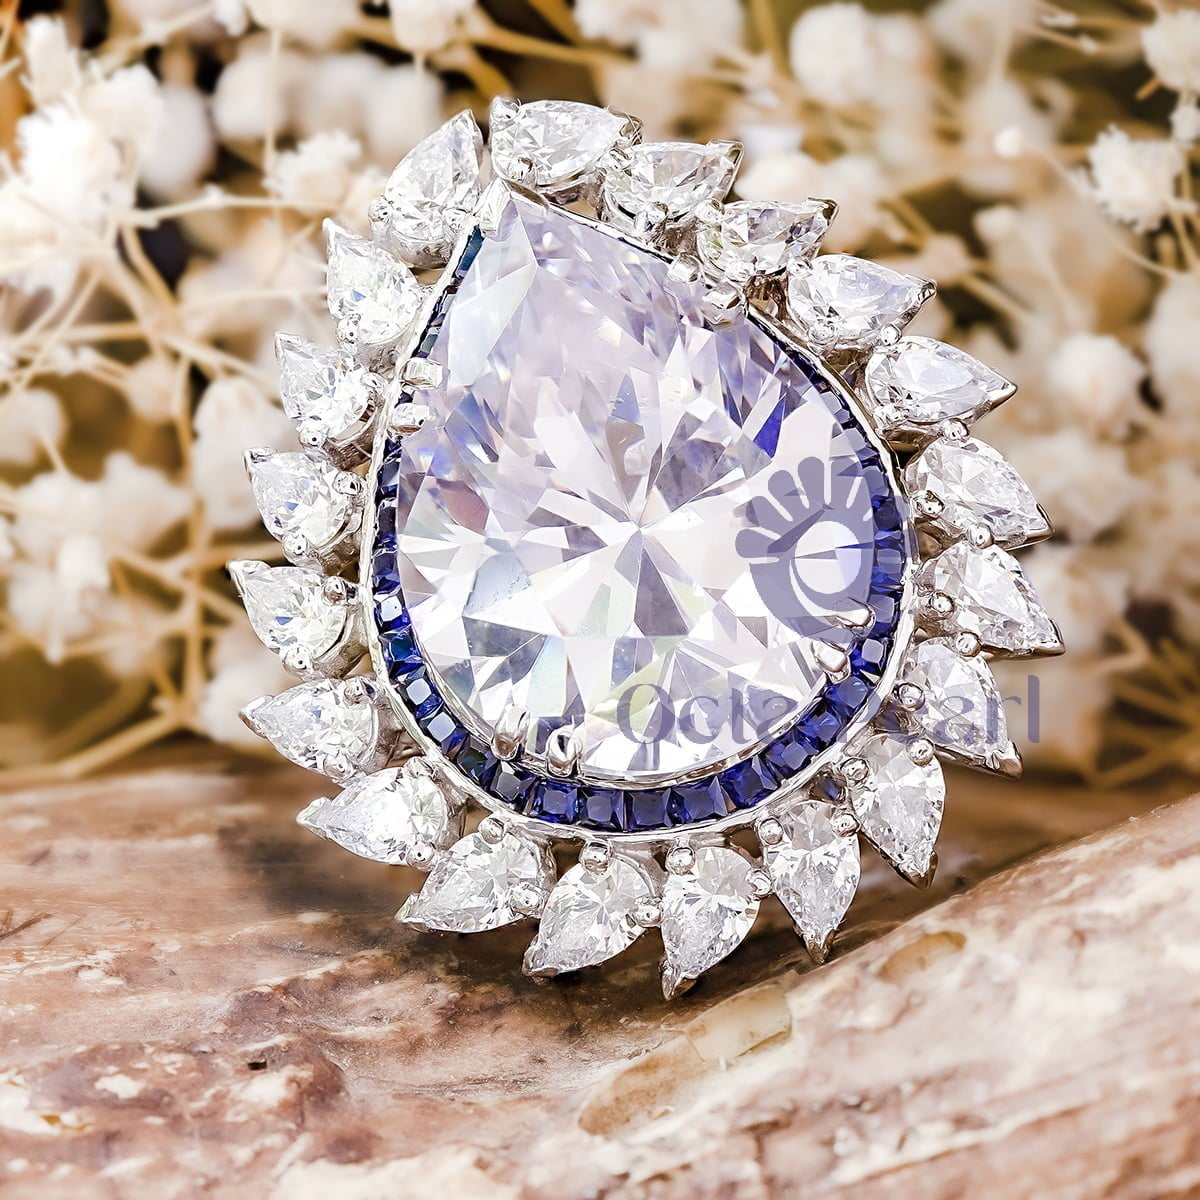 Huge Pear With Blue Sapphire Baguette Cut CZ Stone Halo Cocktail Ring For Party Wear